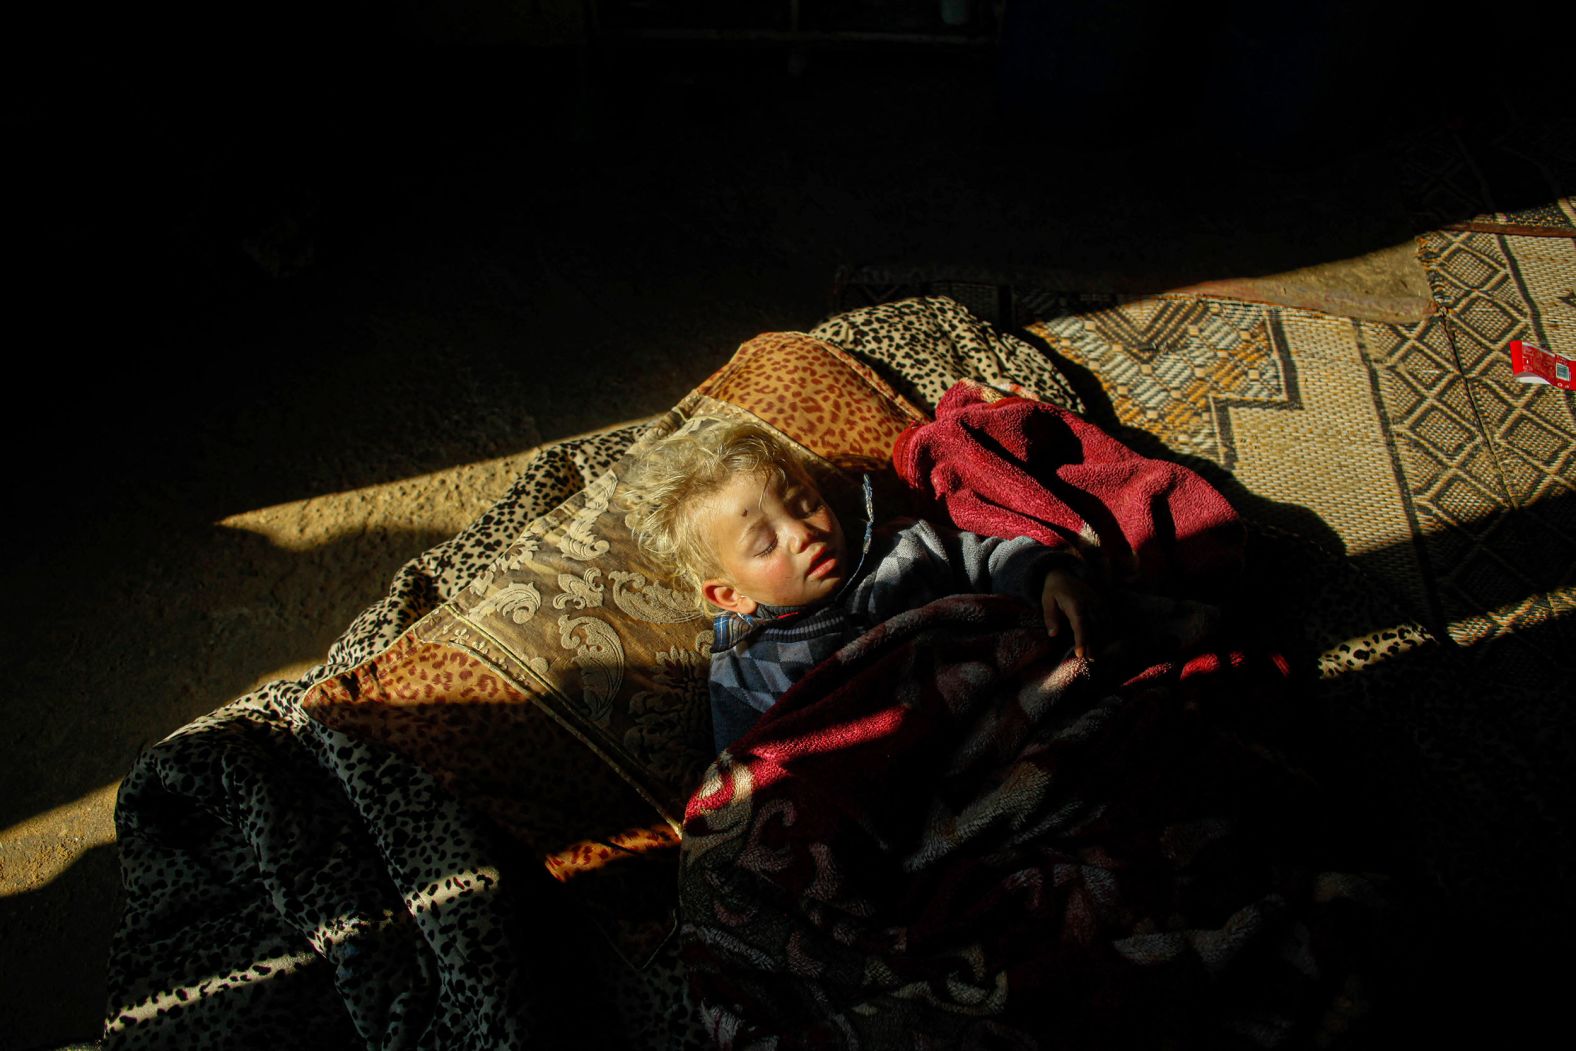 A child sleeps on the floor of a poor neighborhood in Beit Lahia, Gaza, on Tuesday, January 24. <a href="index.php?page=&url=http%3A%2F%2Fwww.cnn.com%2F2023%2F01%2F19%2Fworld%2Fgallery%2Fphotos-this-week-january-12-january-19%2Findex.html" target="_blank">See last week in 34 photos</a>.